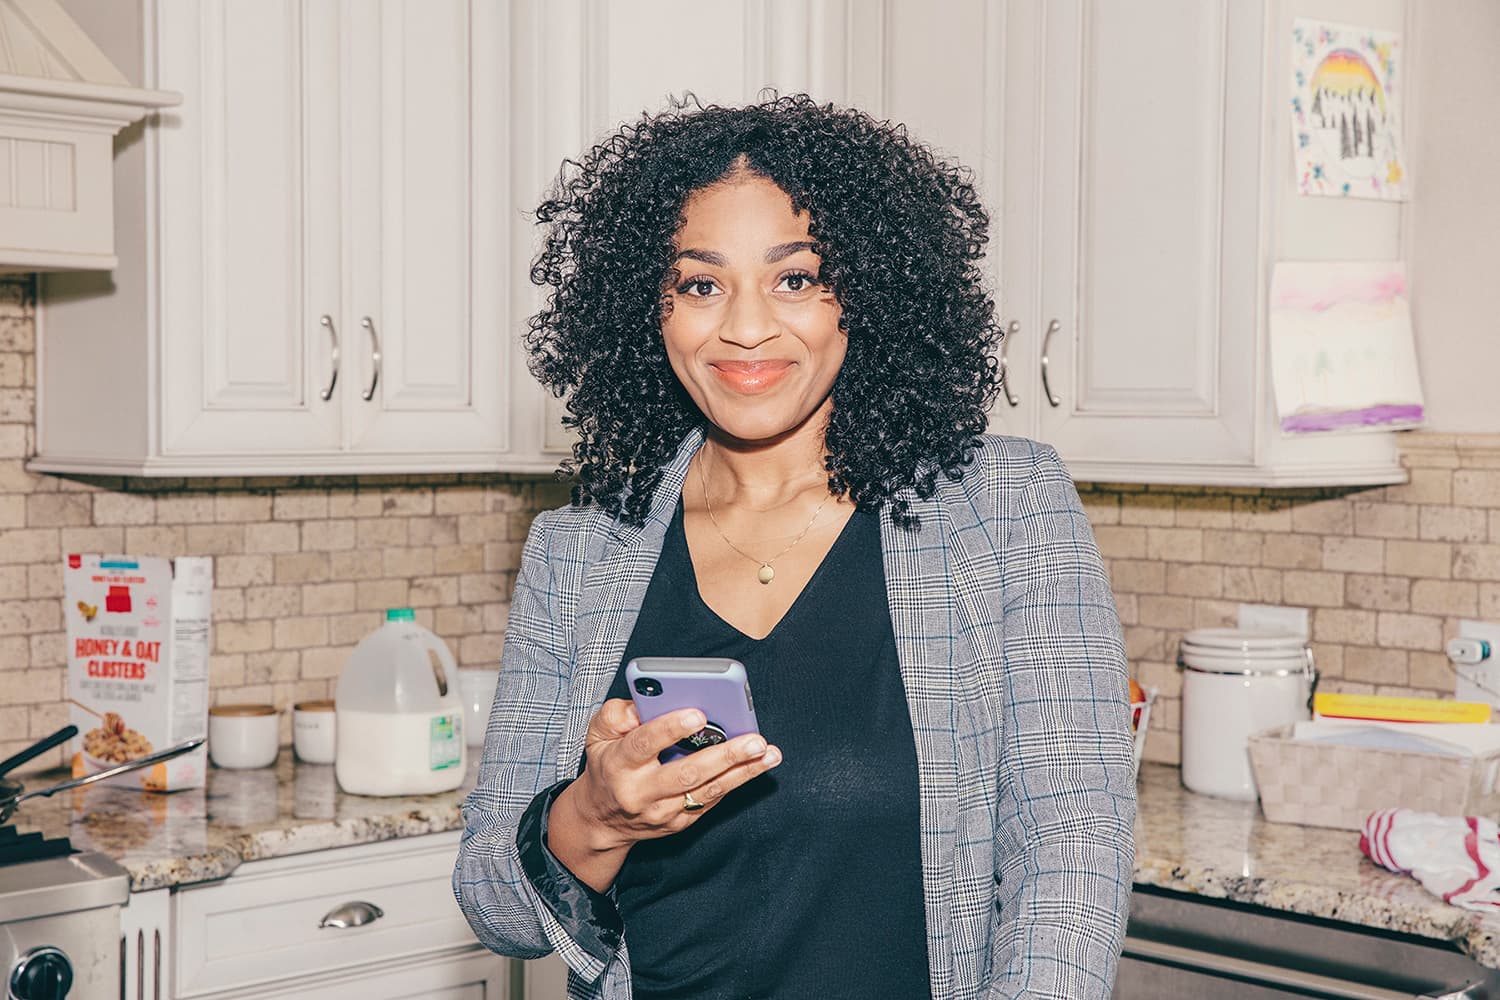 Woman in chic blazer standing in kitchen holding her phone and smiling